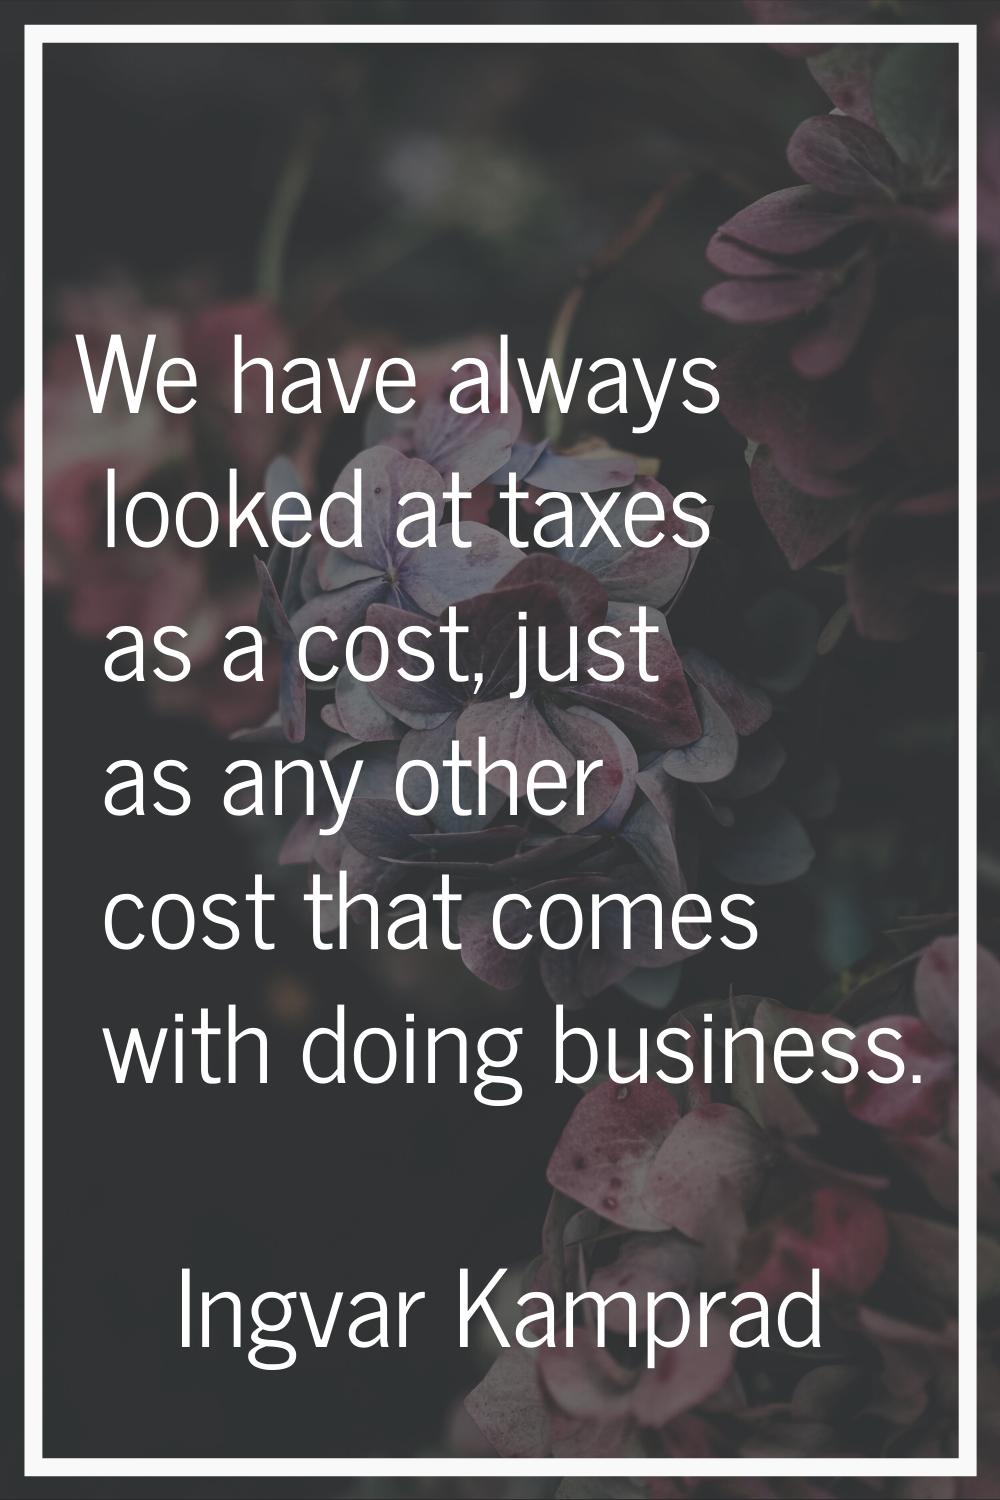 We have always looked at taxes as a cost, just as any other cost that comes with doing business.